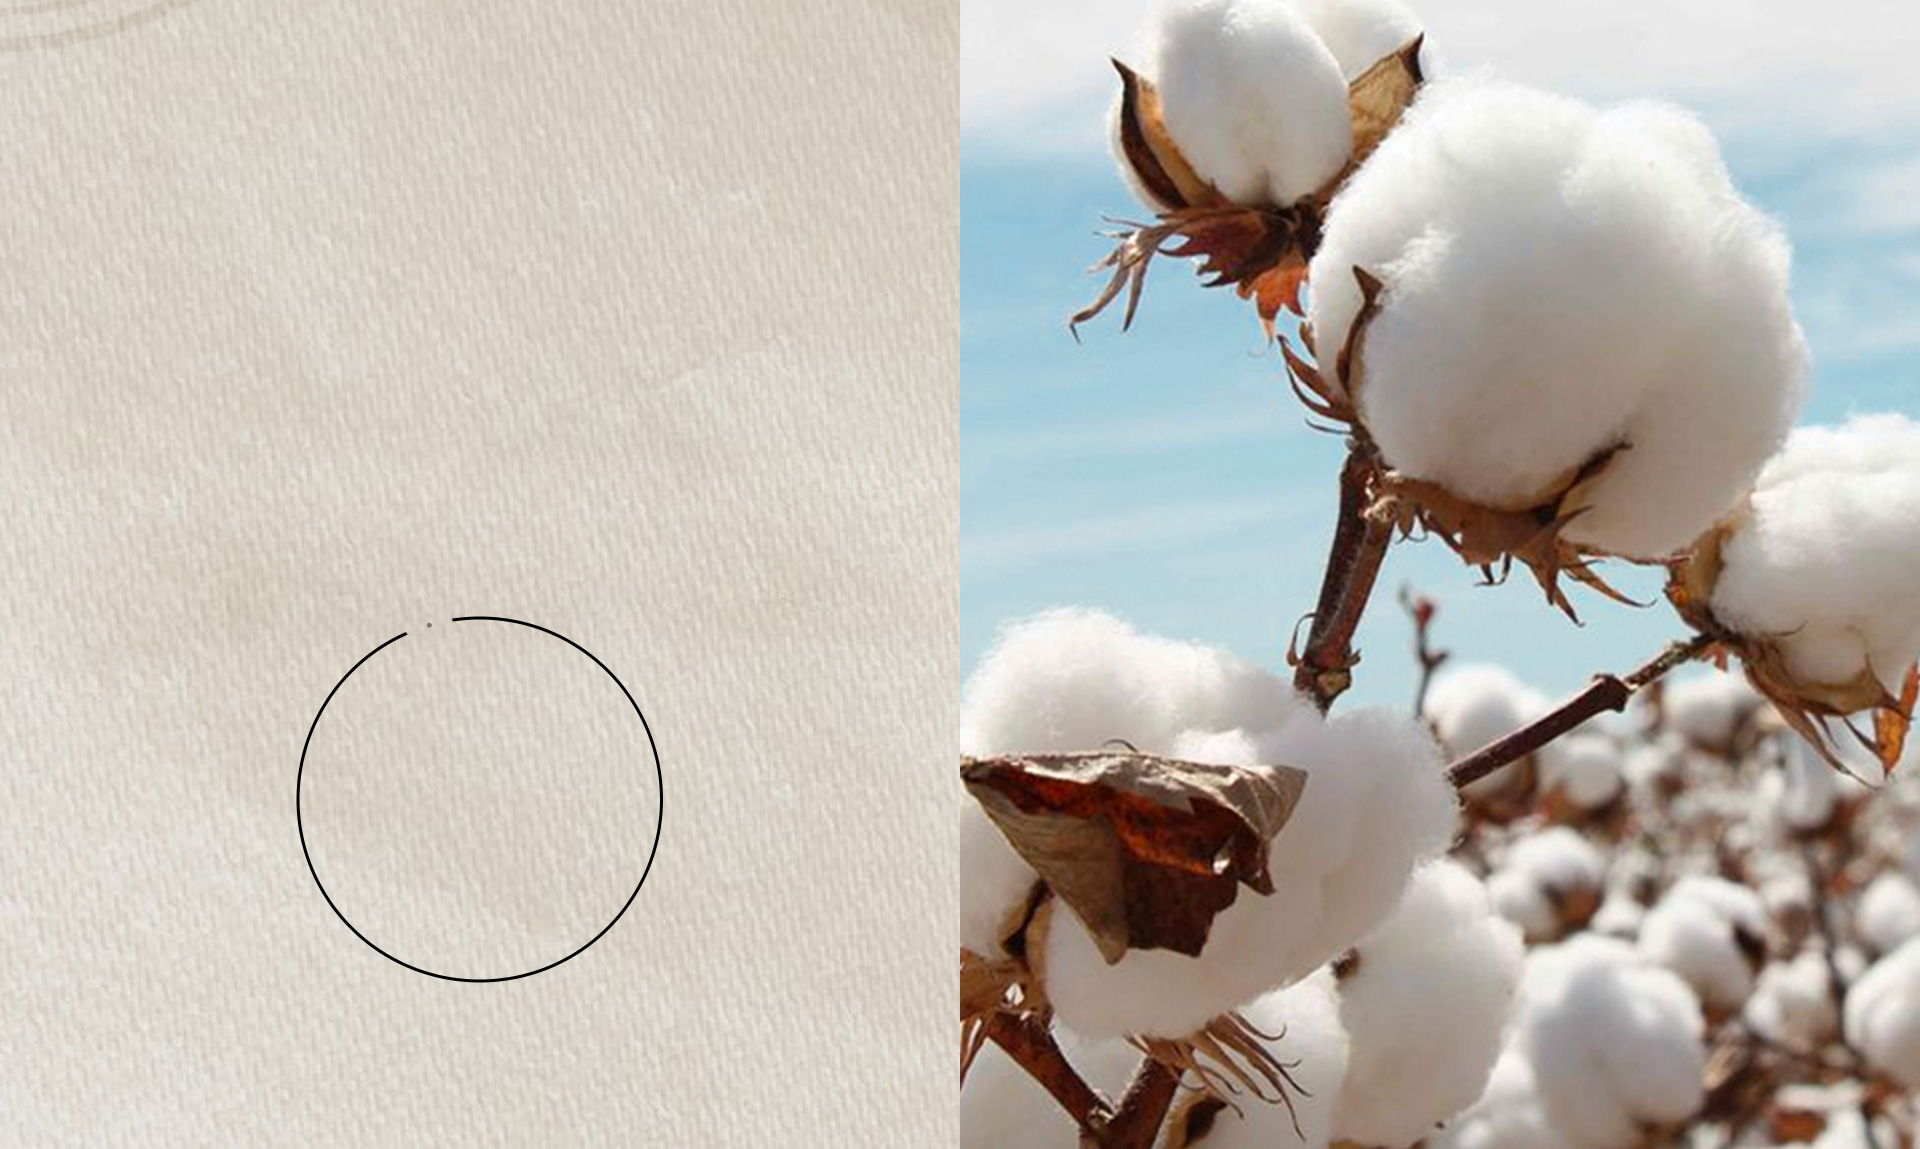 BY 2023 WE AIM TO USE 100% SUSTAINABLE COTTON. We define more sustainable cotton as including Better Cotton (formerly BCI), verified US-grown cotton (USCTP), organic, in-conversion (to verified organic), recycled and regenerative. 97% of our goal